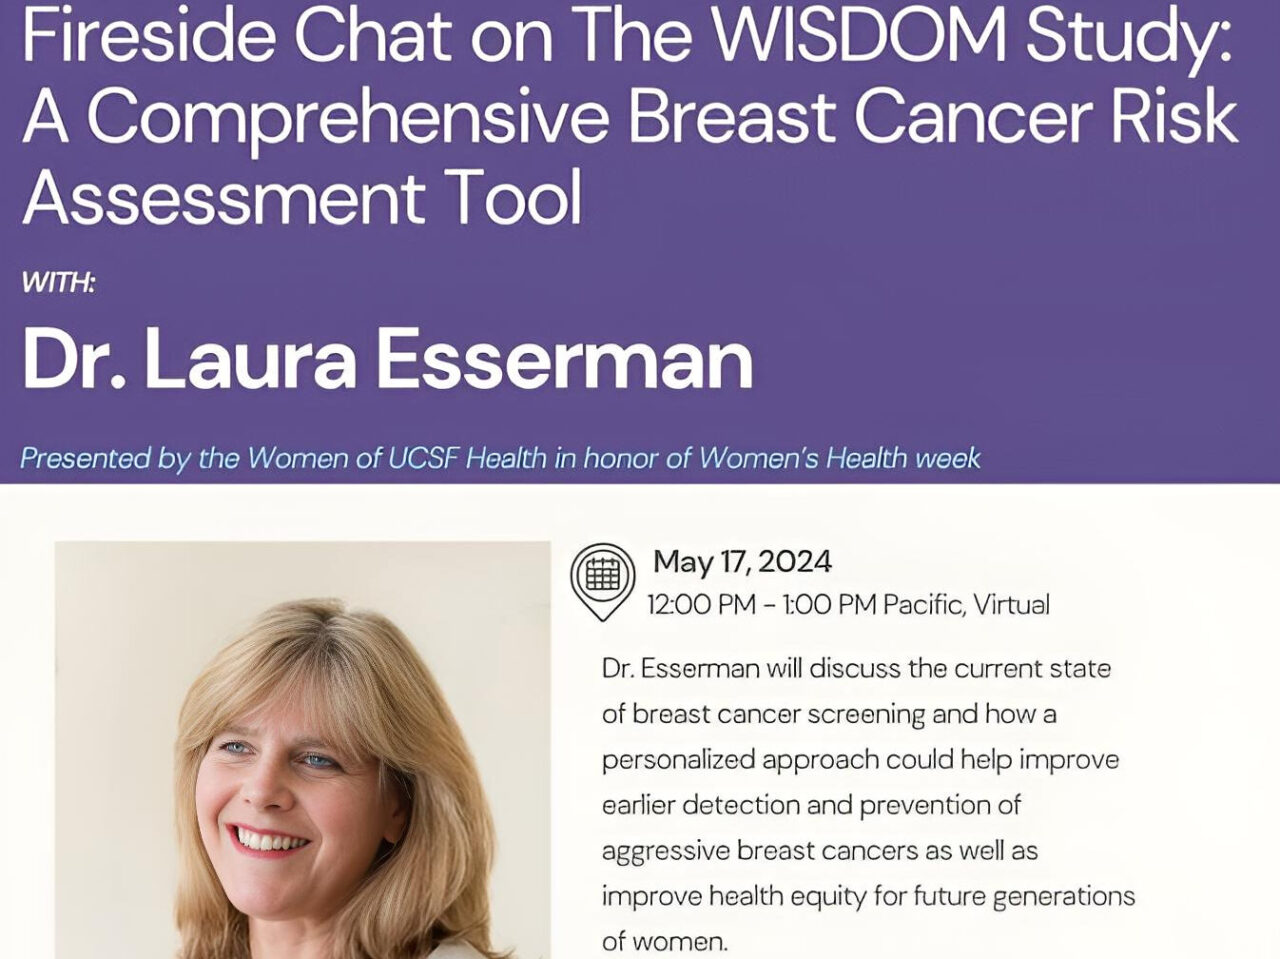 Join The Wisdom Study founder Dr. Laura Esserman for a Fireside Chat on breast screening